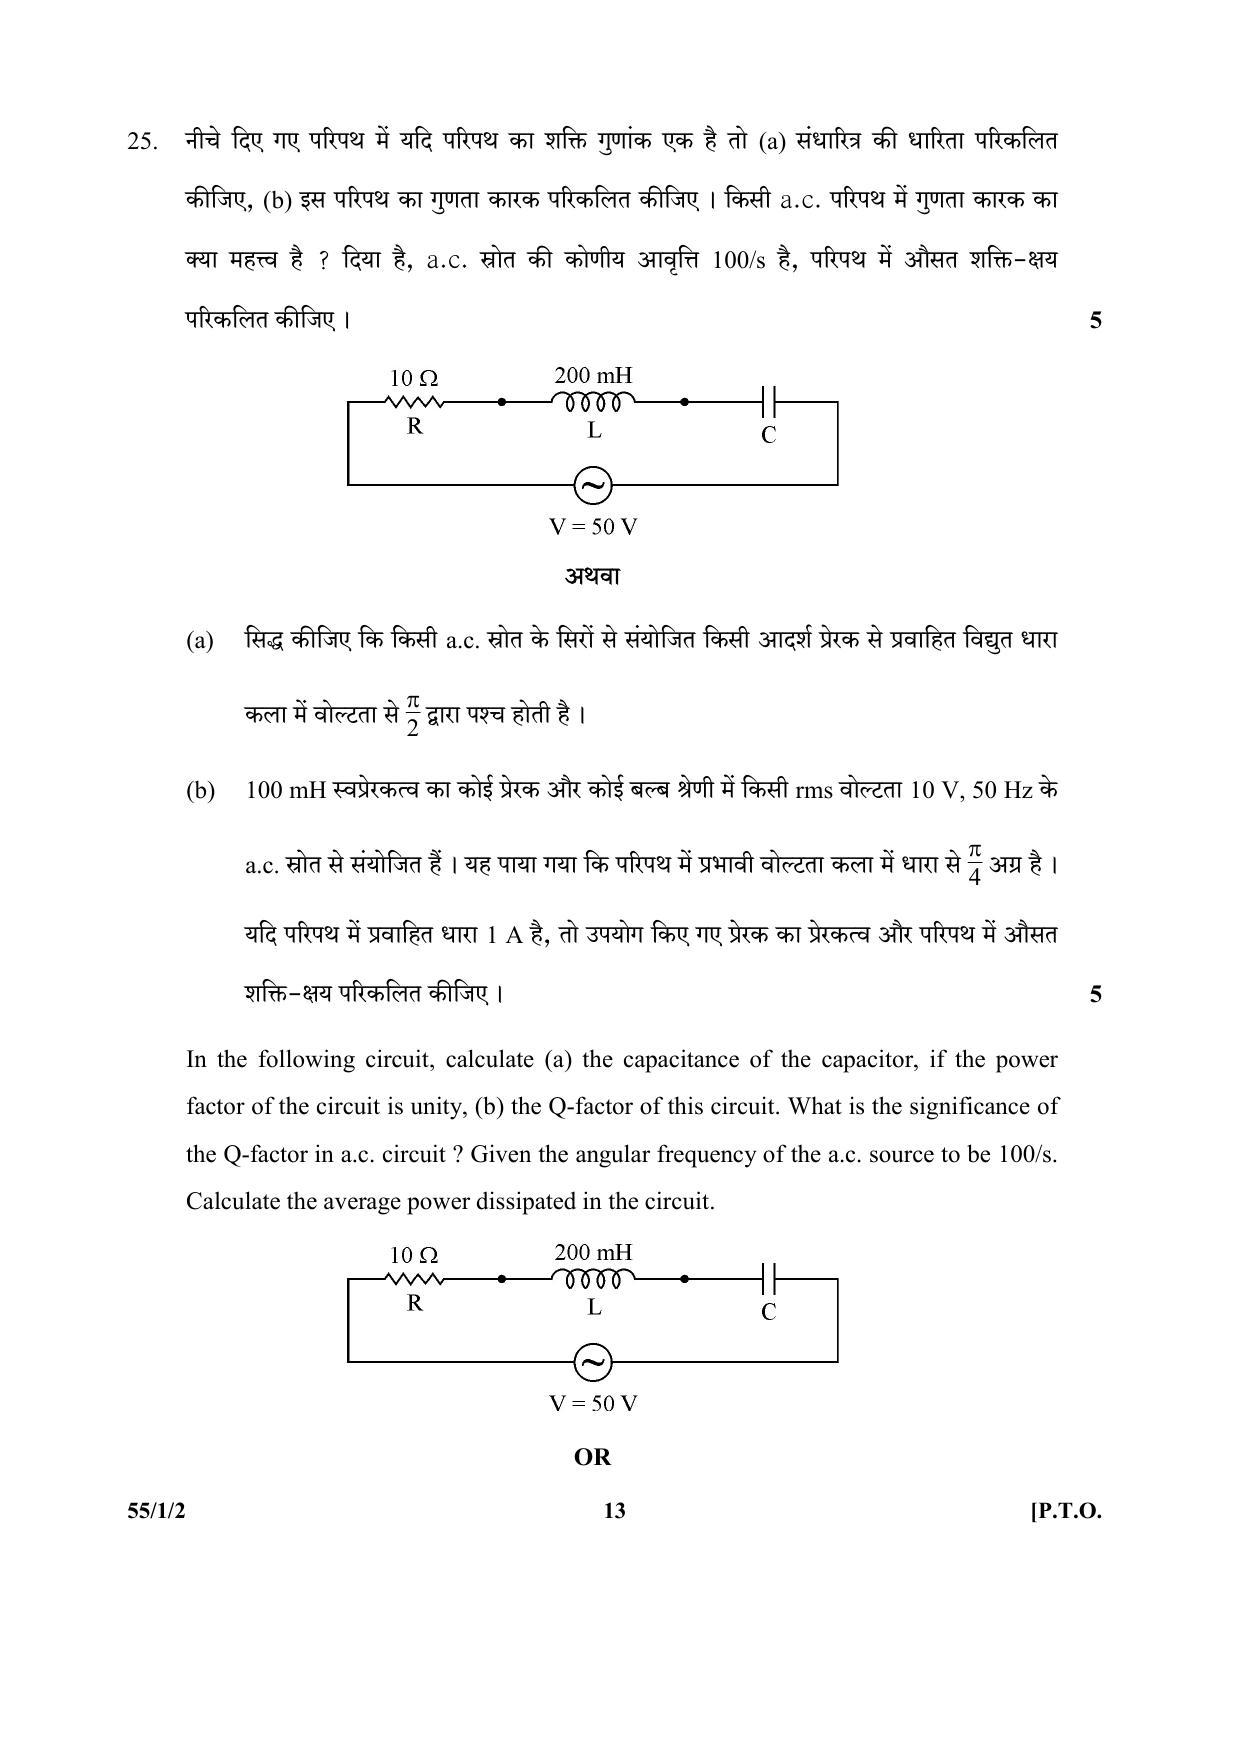 CBSE Class 12 55-1-2 (Physics) 2017-comptt Question Paper - Page 13